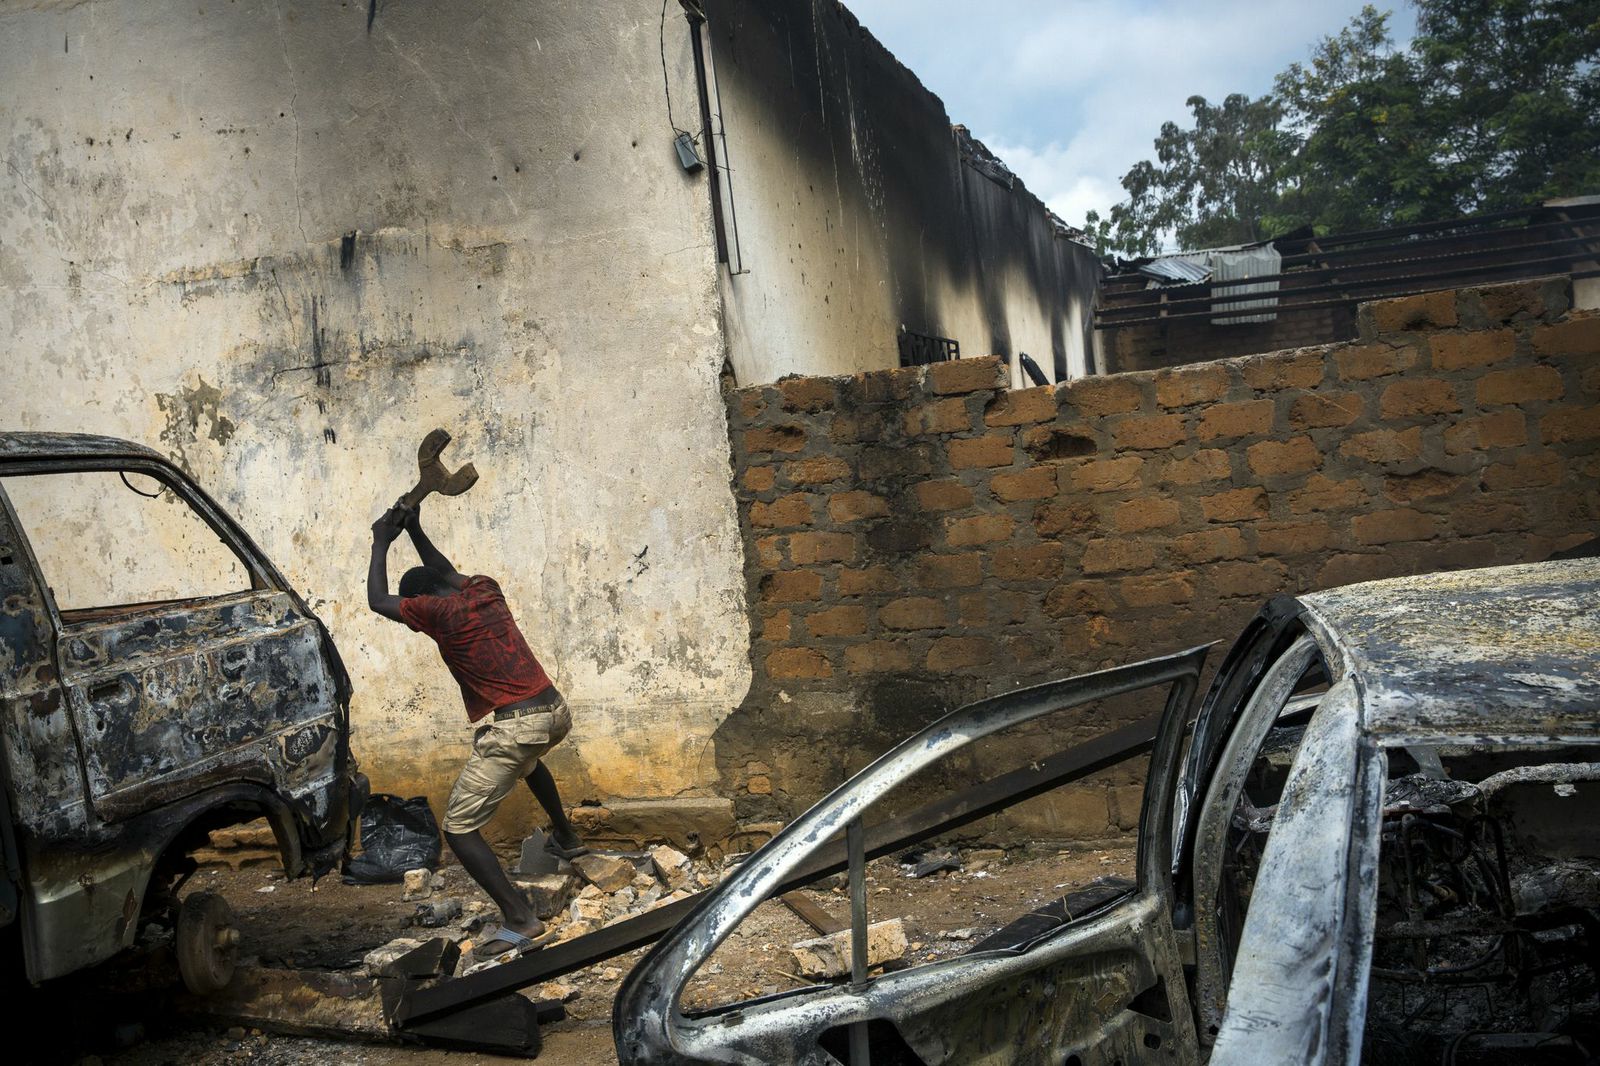 A Christian man is destroying burn out cars in rage, next to a looted mosque that was set on fire earlier, in the Central African Republic's capital Bangui.